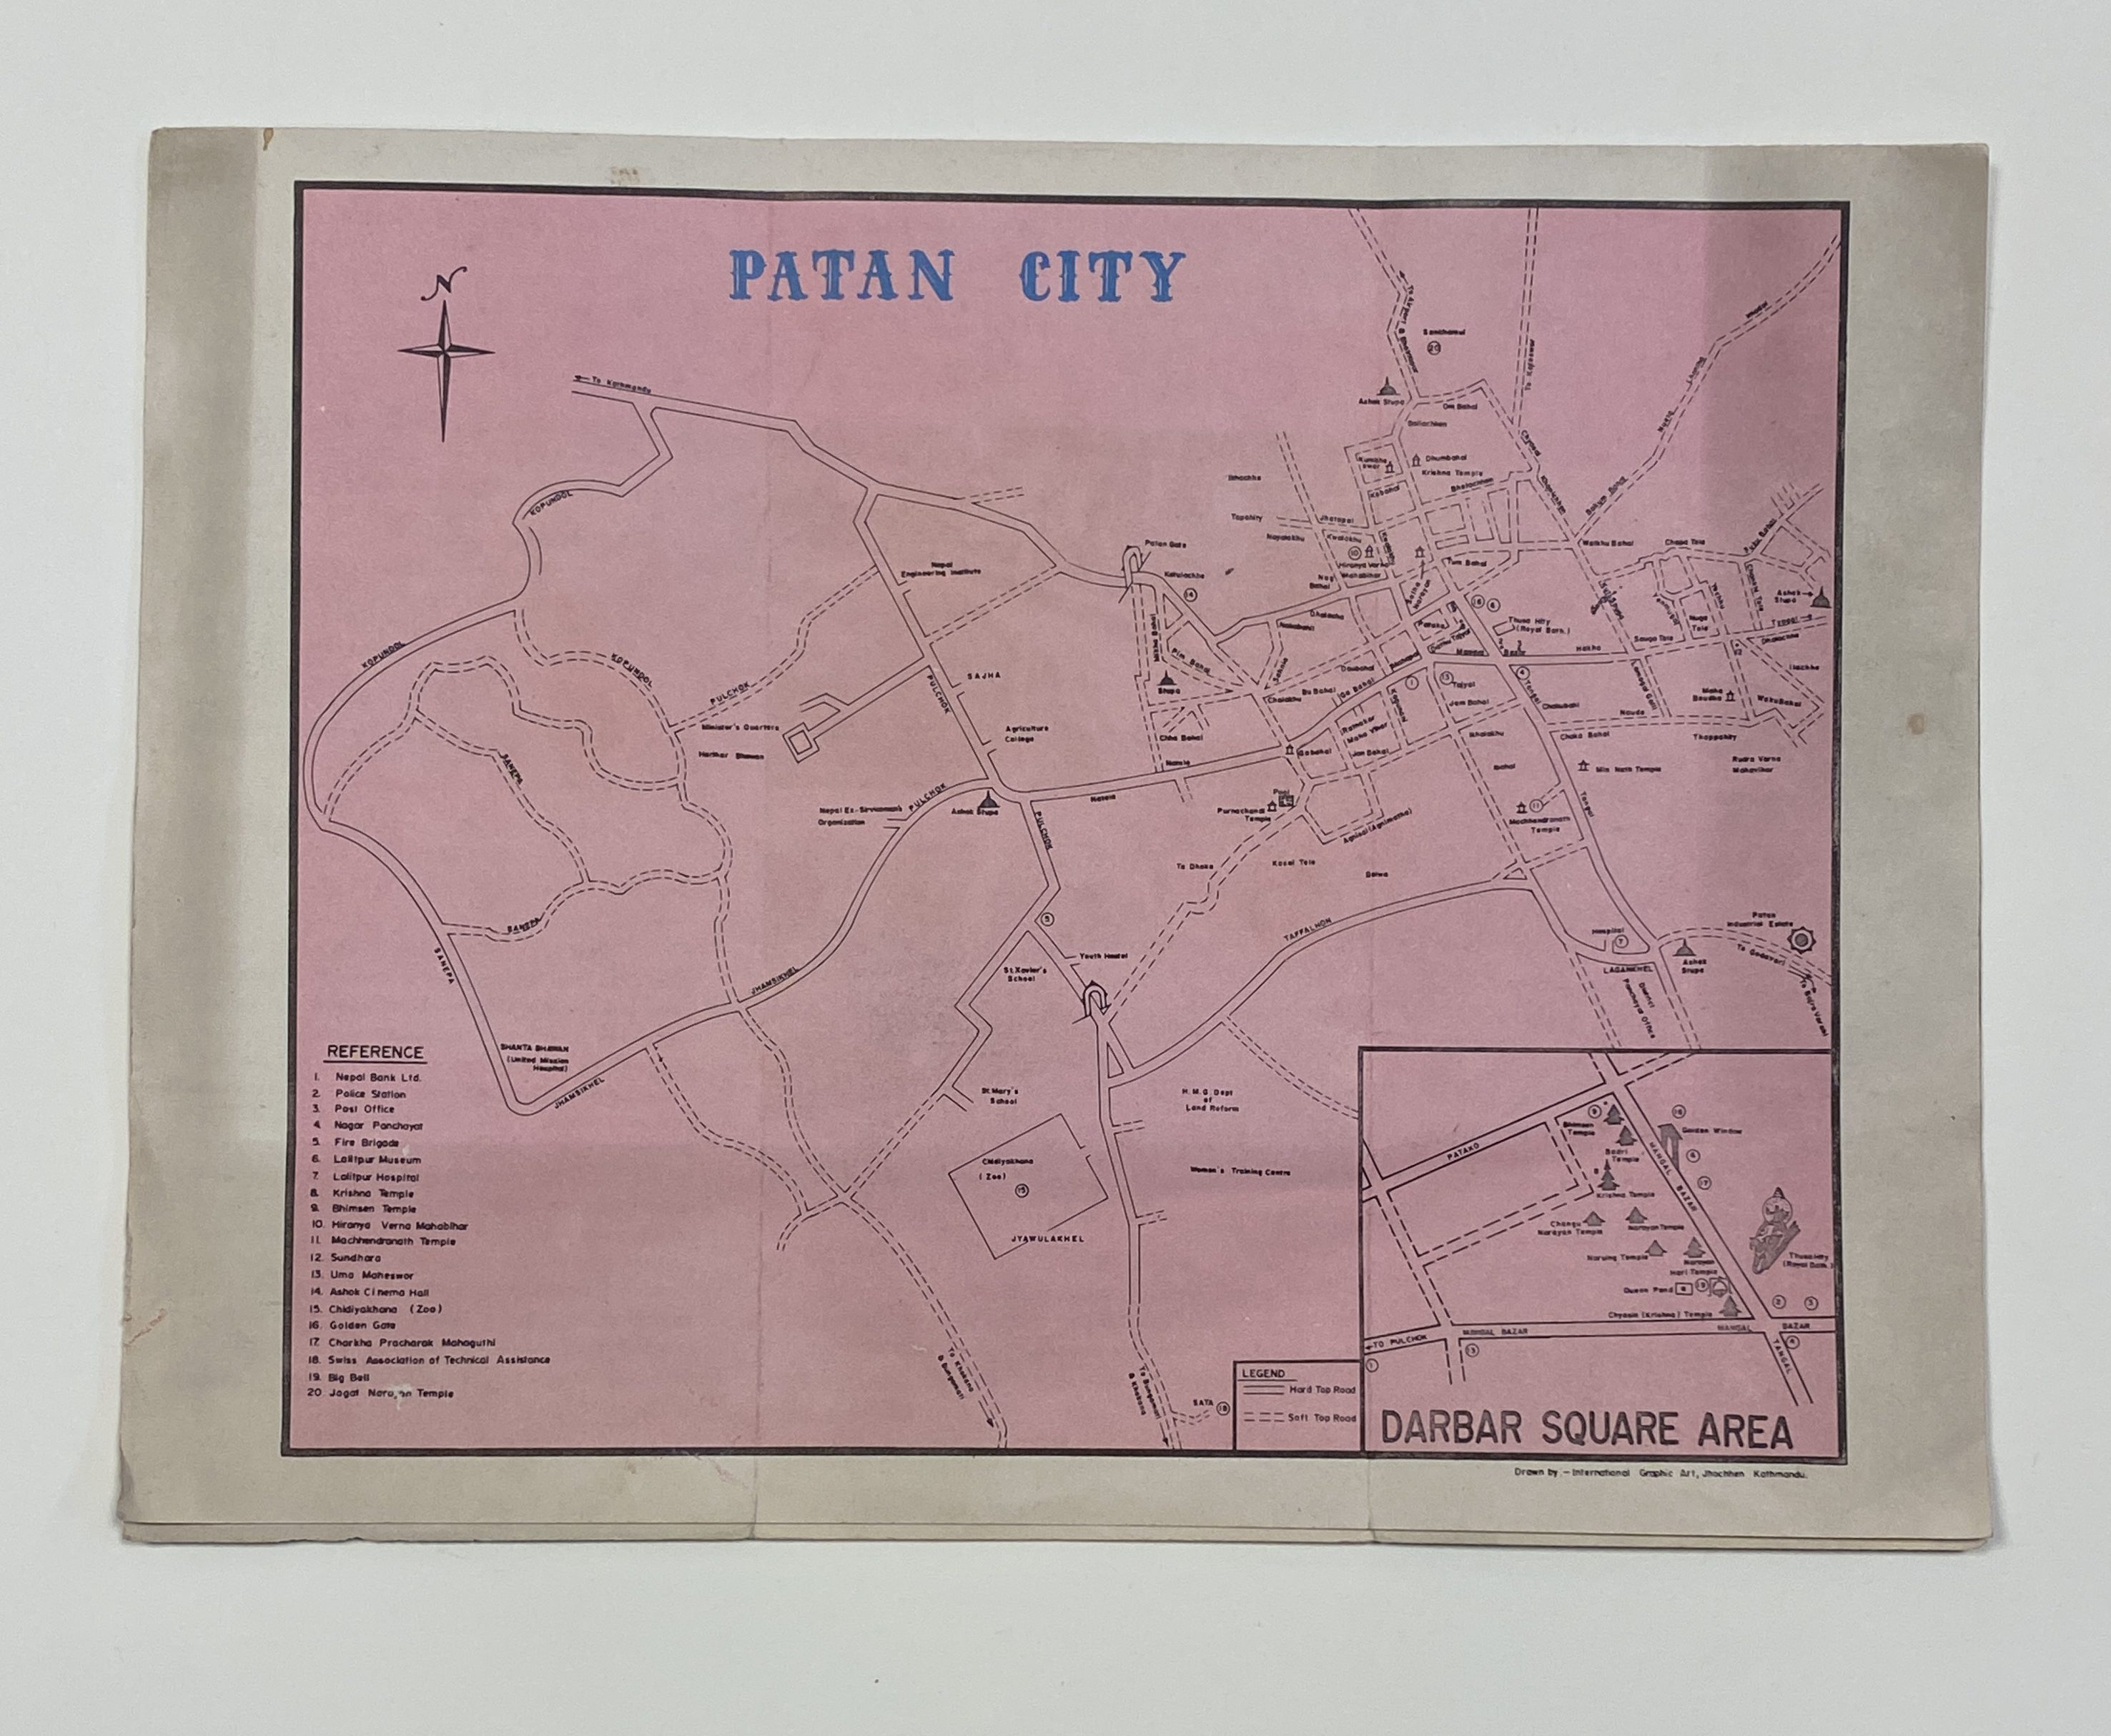 A single sheet of white paper with a printed street map in English in black ink on a pink background, with the title "Patan City" in bright blue ink.